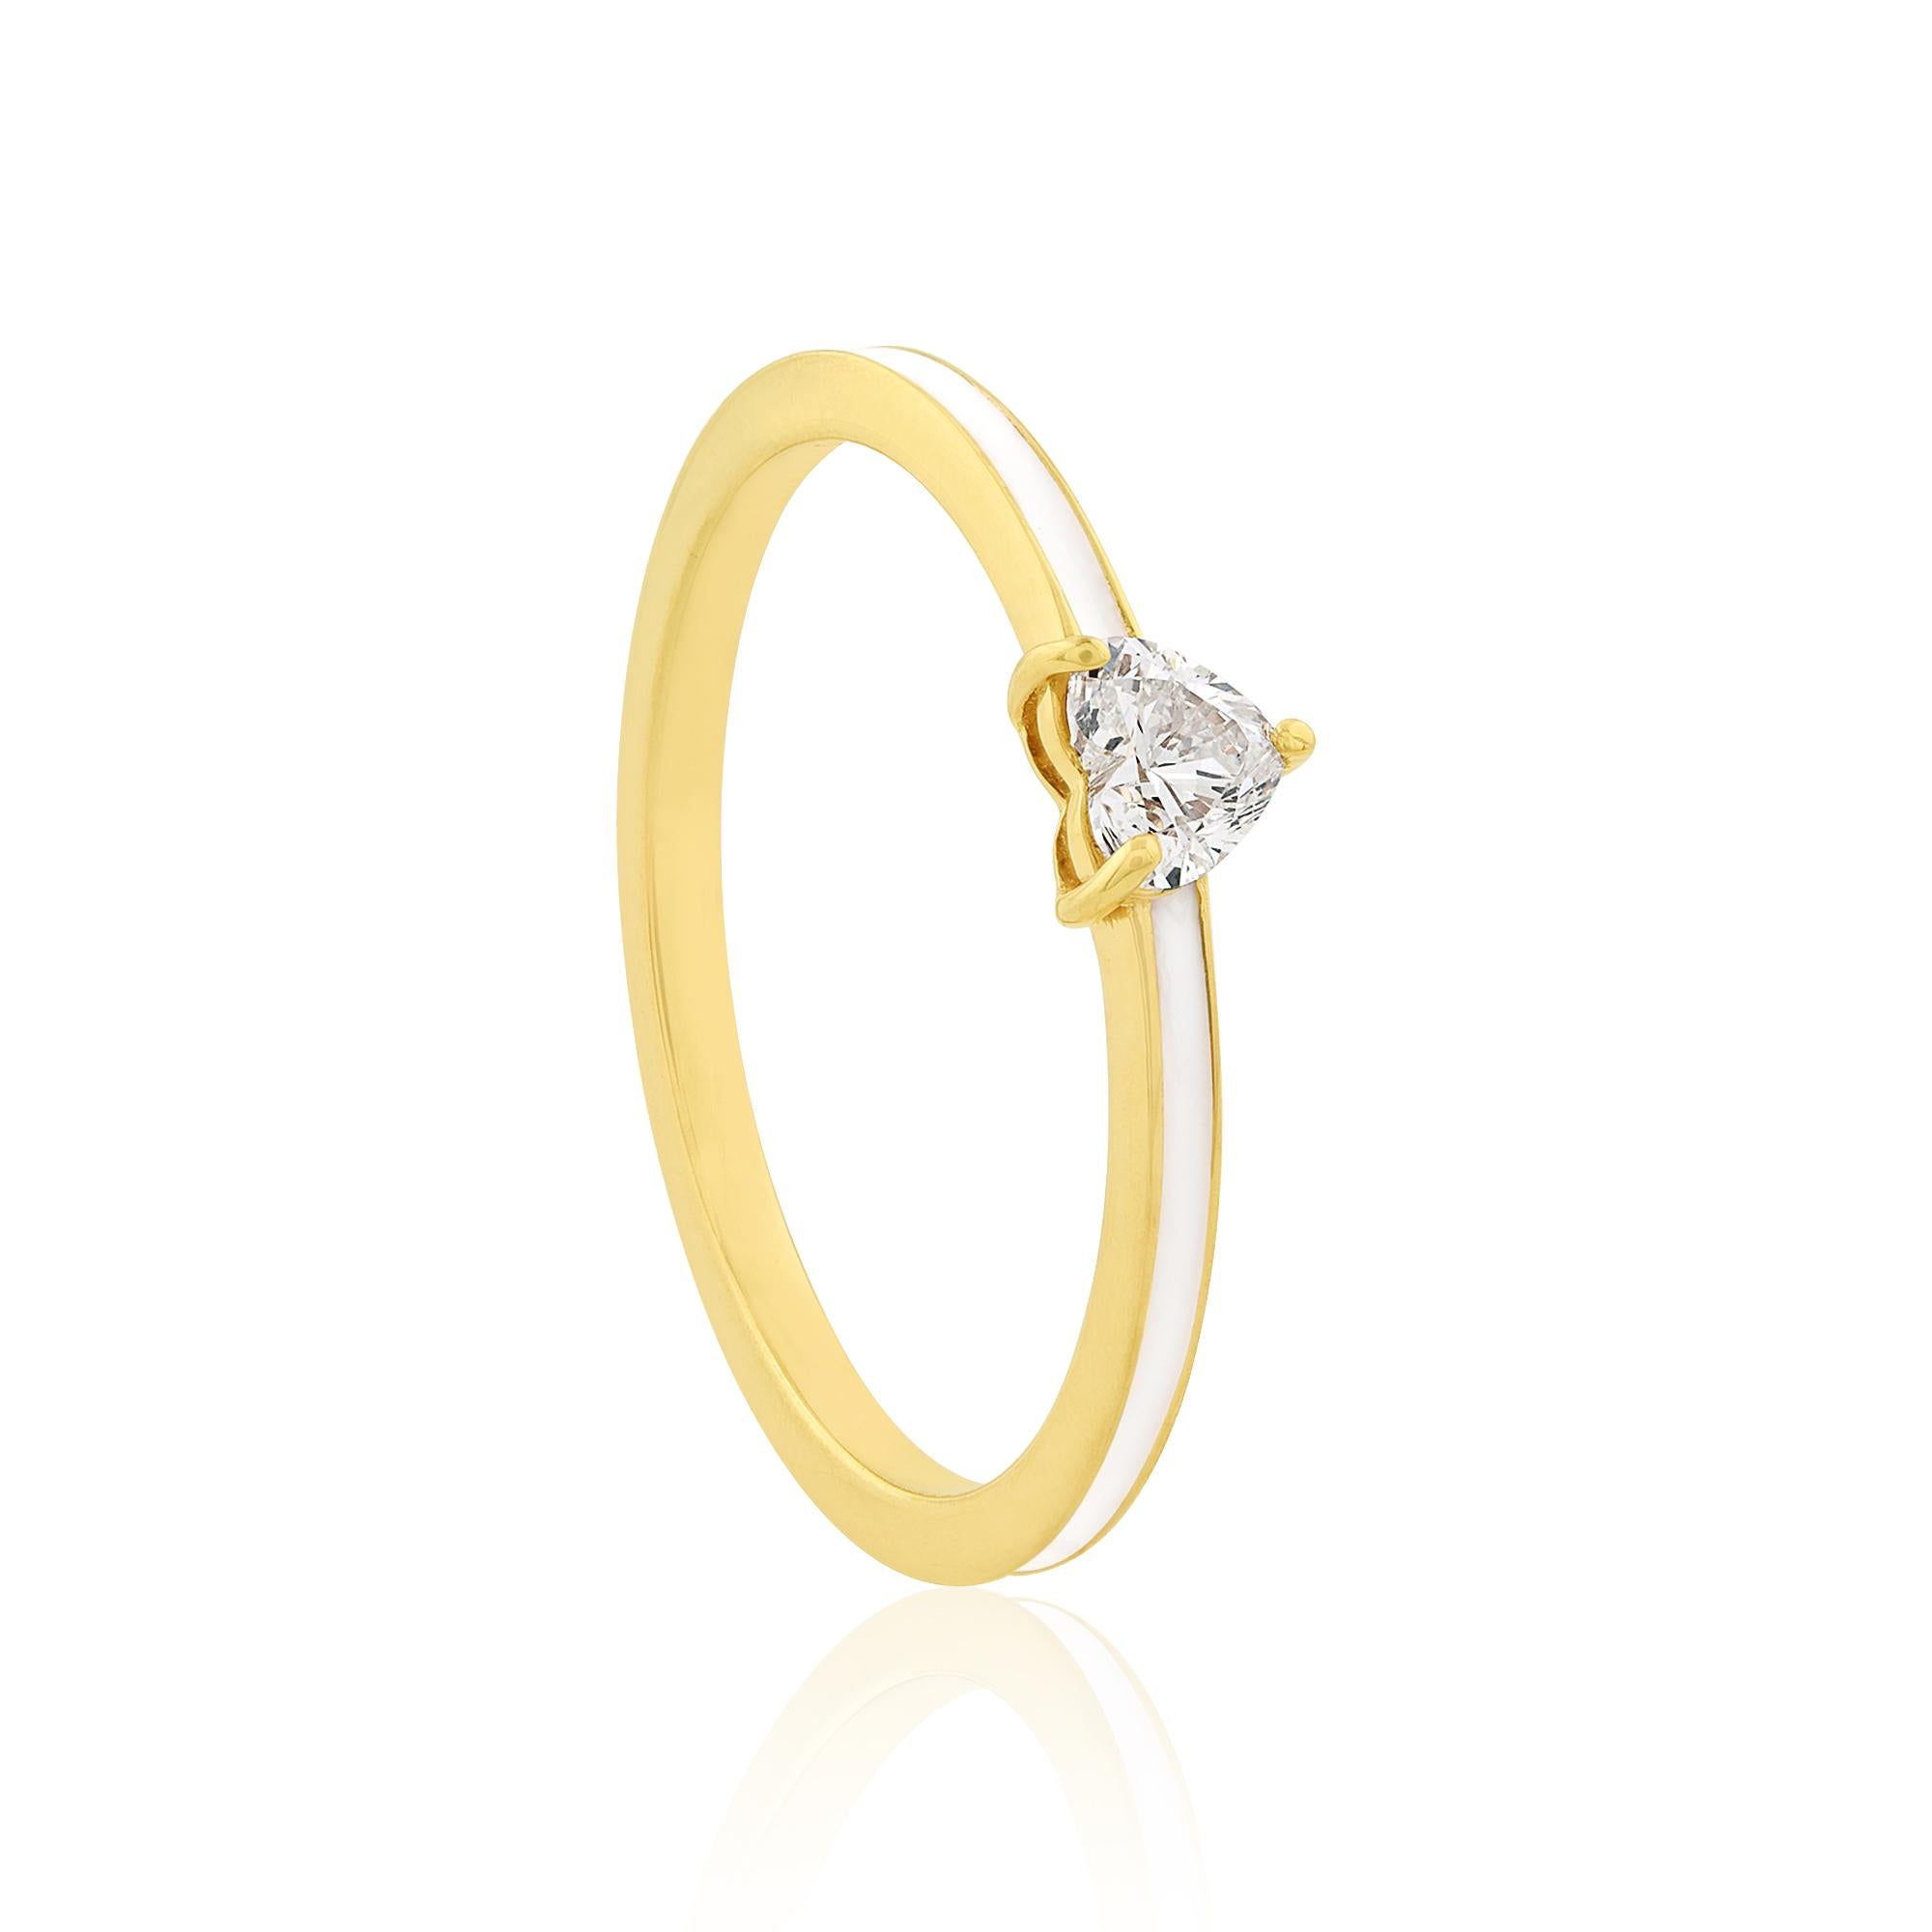 Item Code :- SFR-2136A
Gross Weight :- 2.01 gm
14k Yellow Gold Weight :- 1.95 gm
Natural Diamond Weight :- 0.28 carat ( AVERAGE DIAMOND CLARITY SI1-SI2 & COLOR H-I )
Ring Size :- 7 US & All ring size available

✦ Sizing
.....................
We can